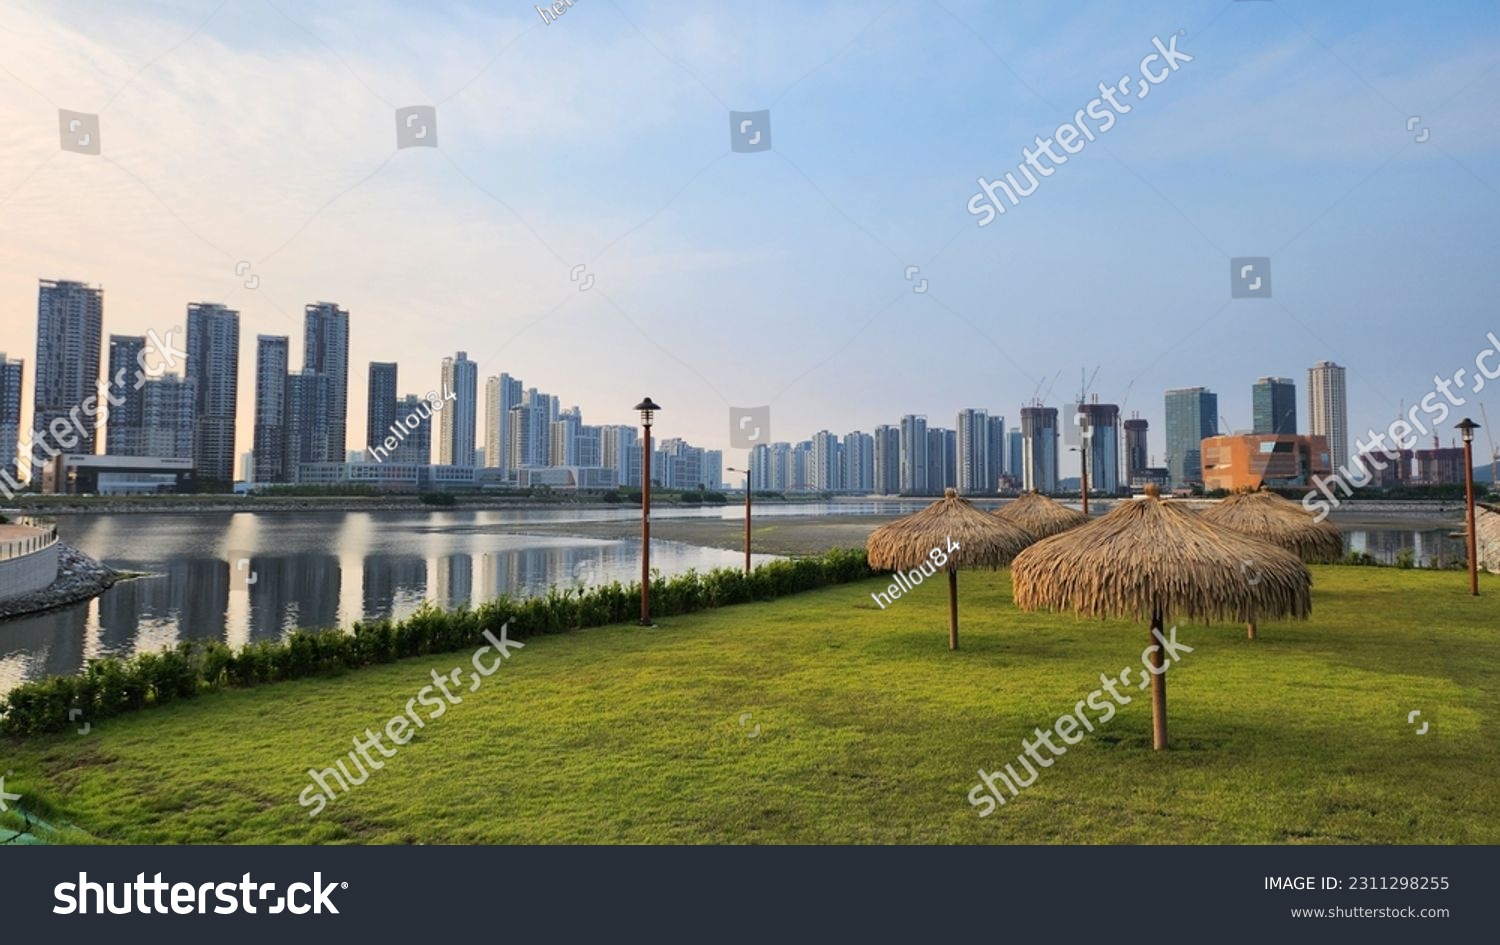 The Waterfront Lake in Songdo, Incheon, has a Southeast Asian feel. #2311298255